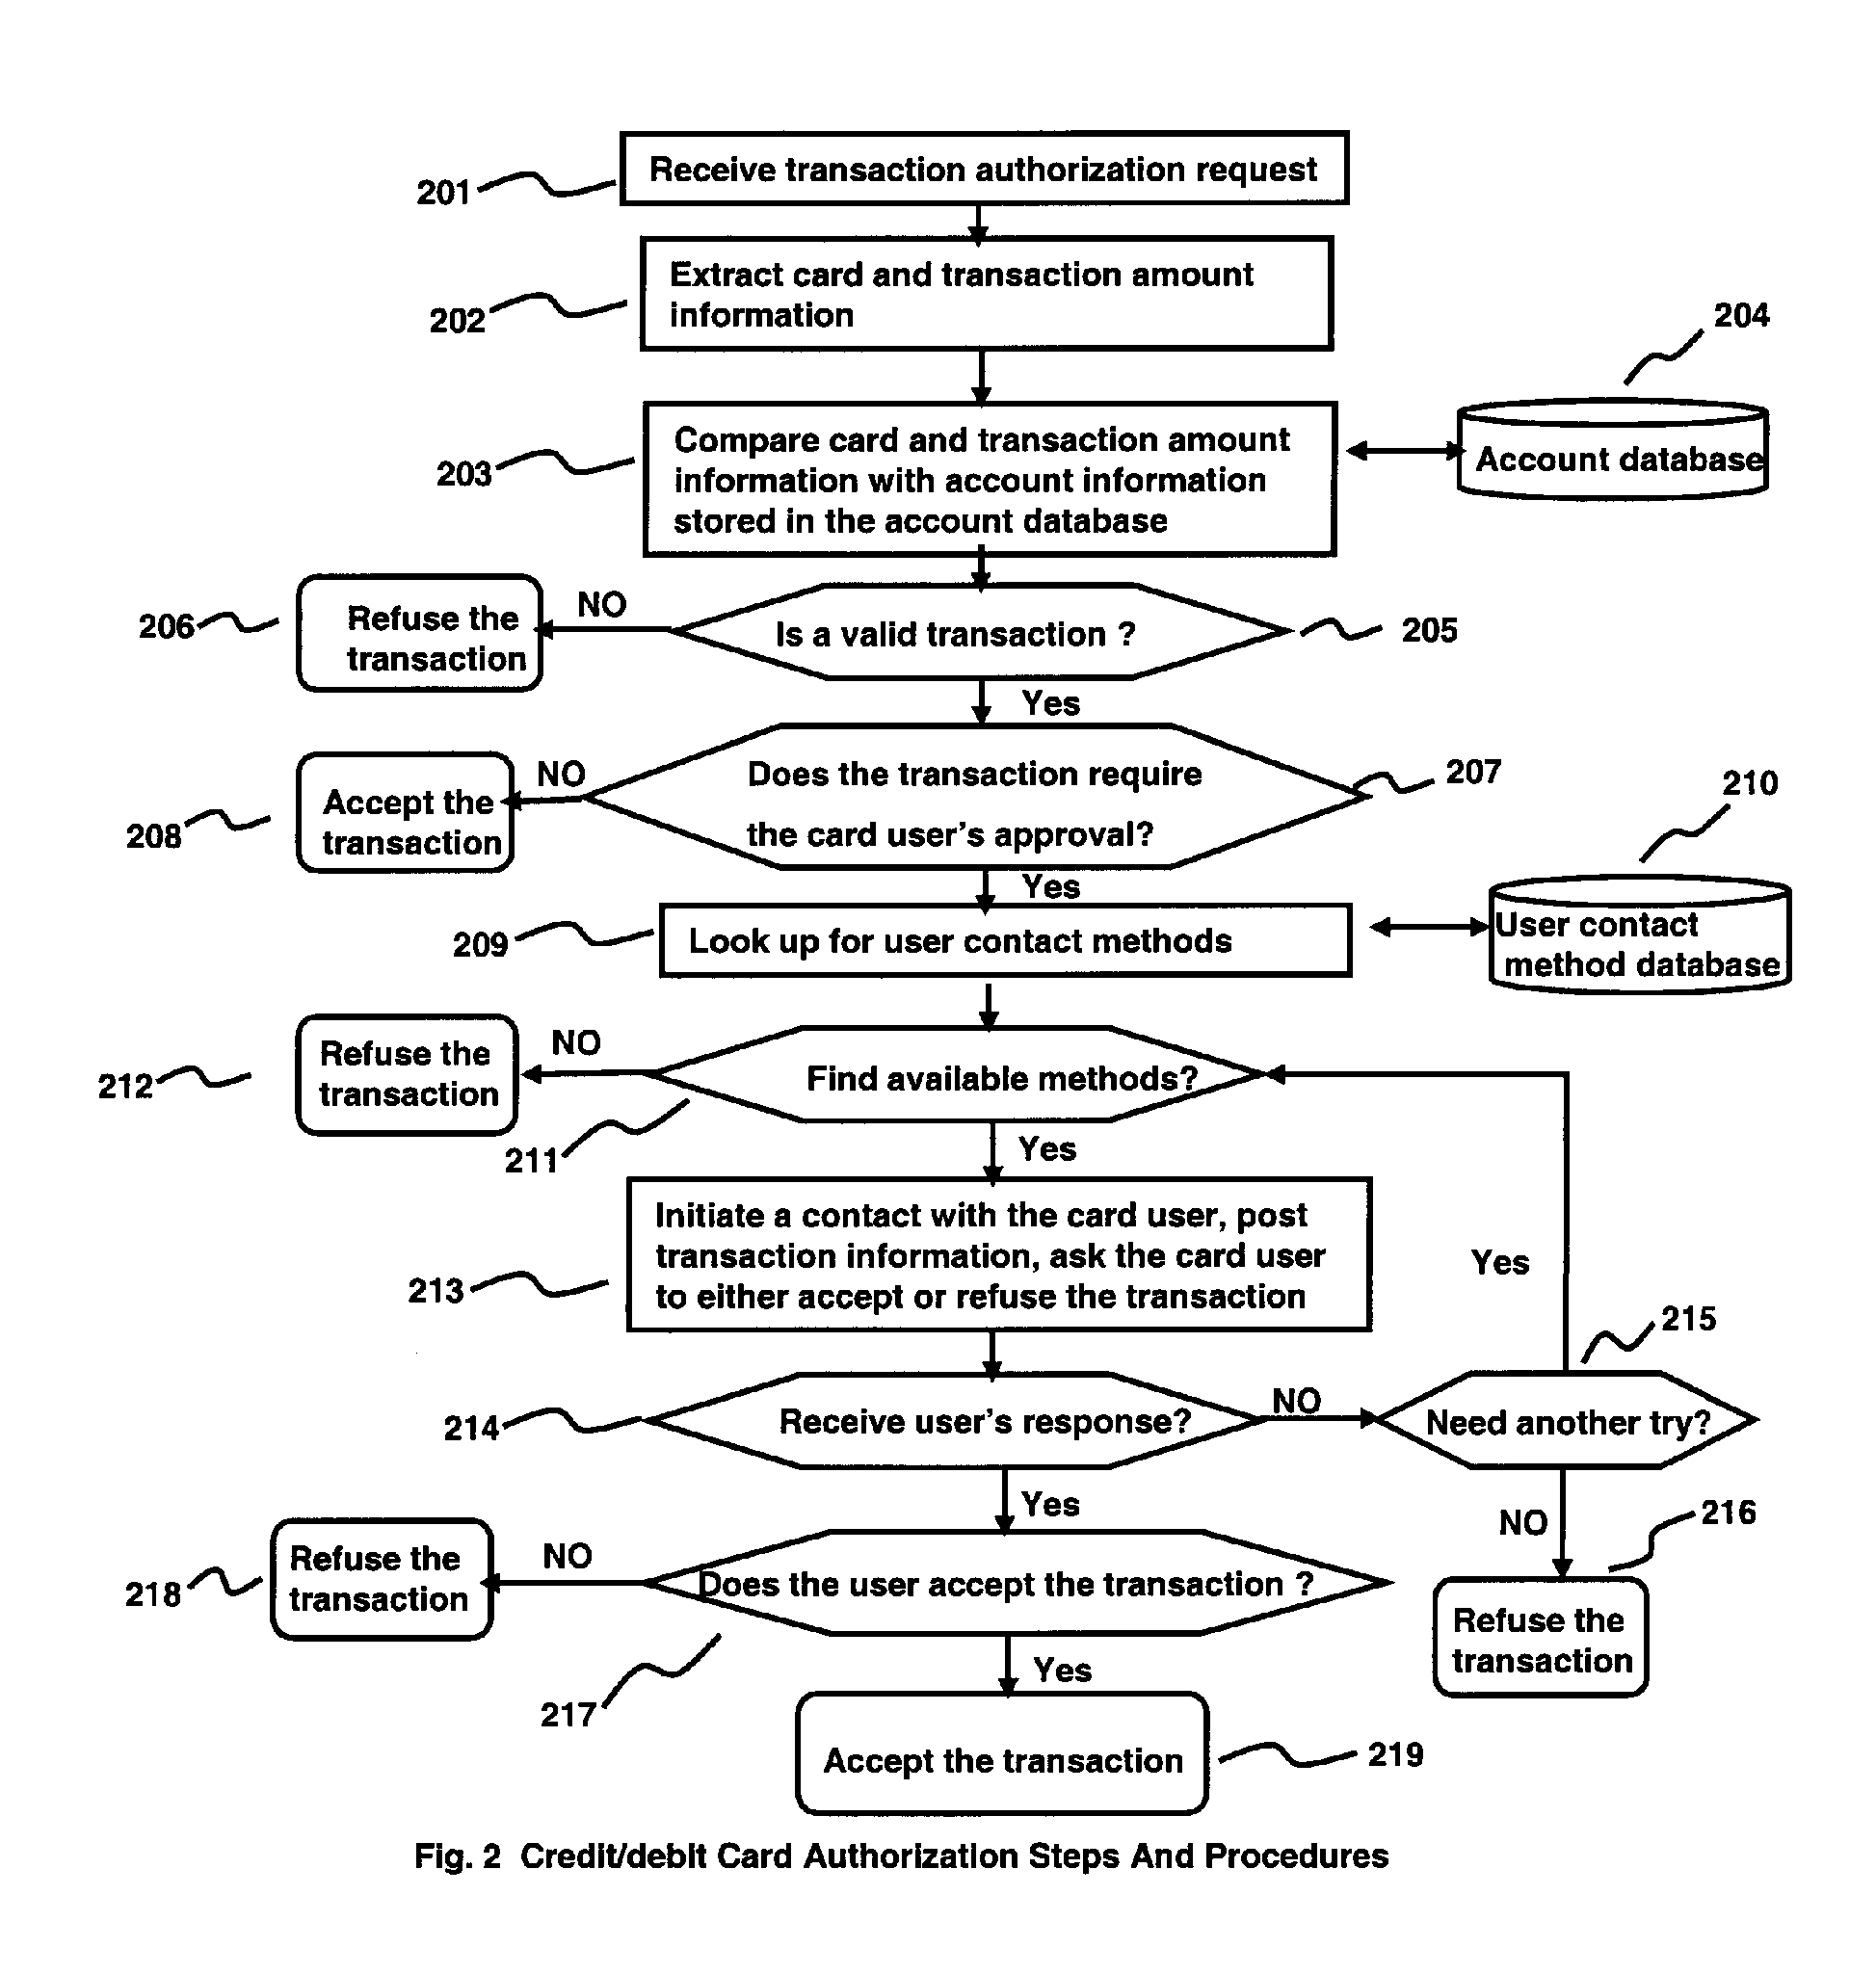 Anti-Fraud Credit/Debit Card Authorization System and Method